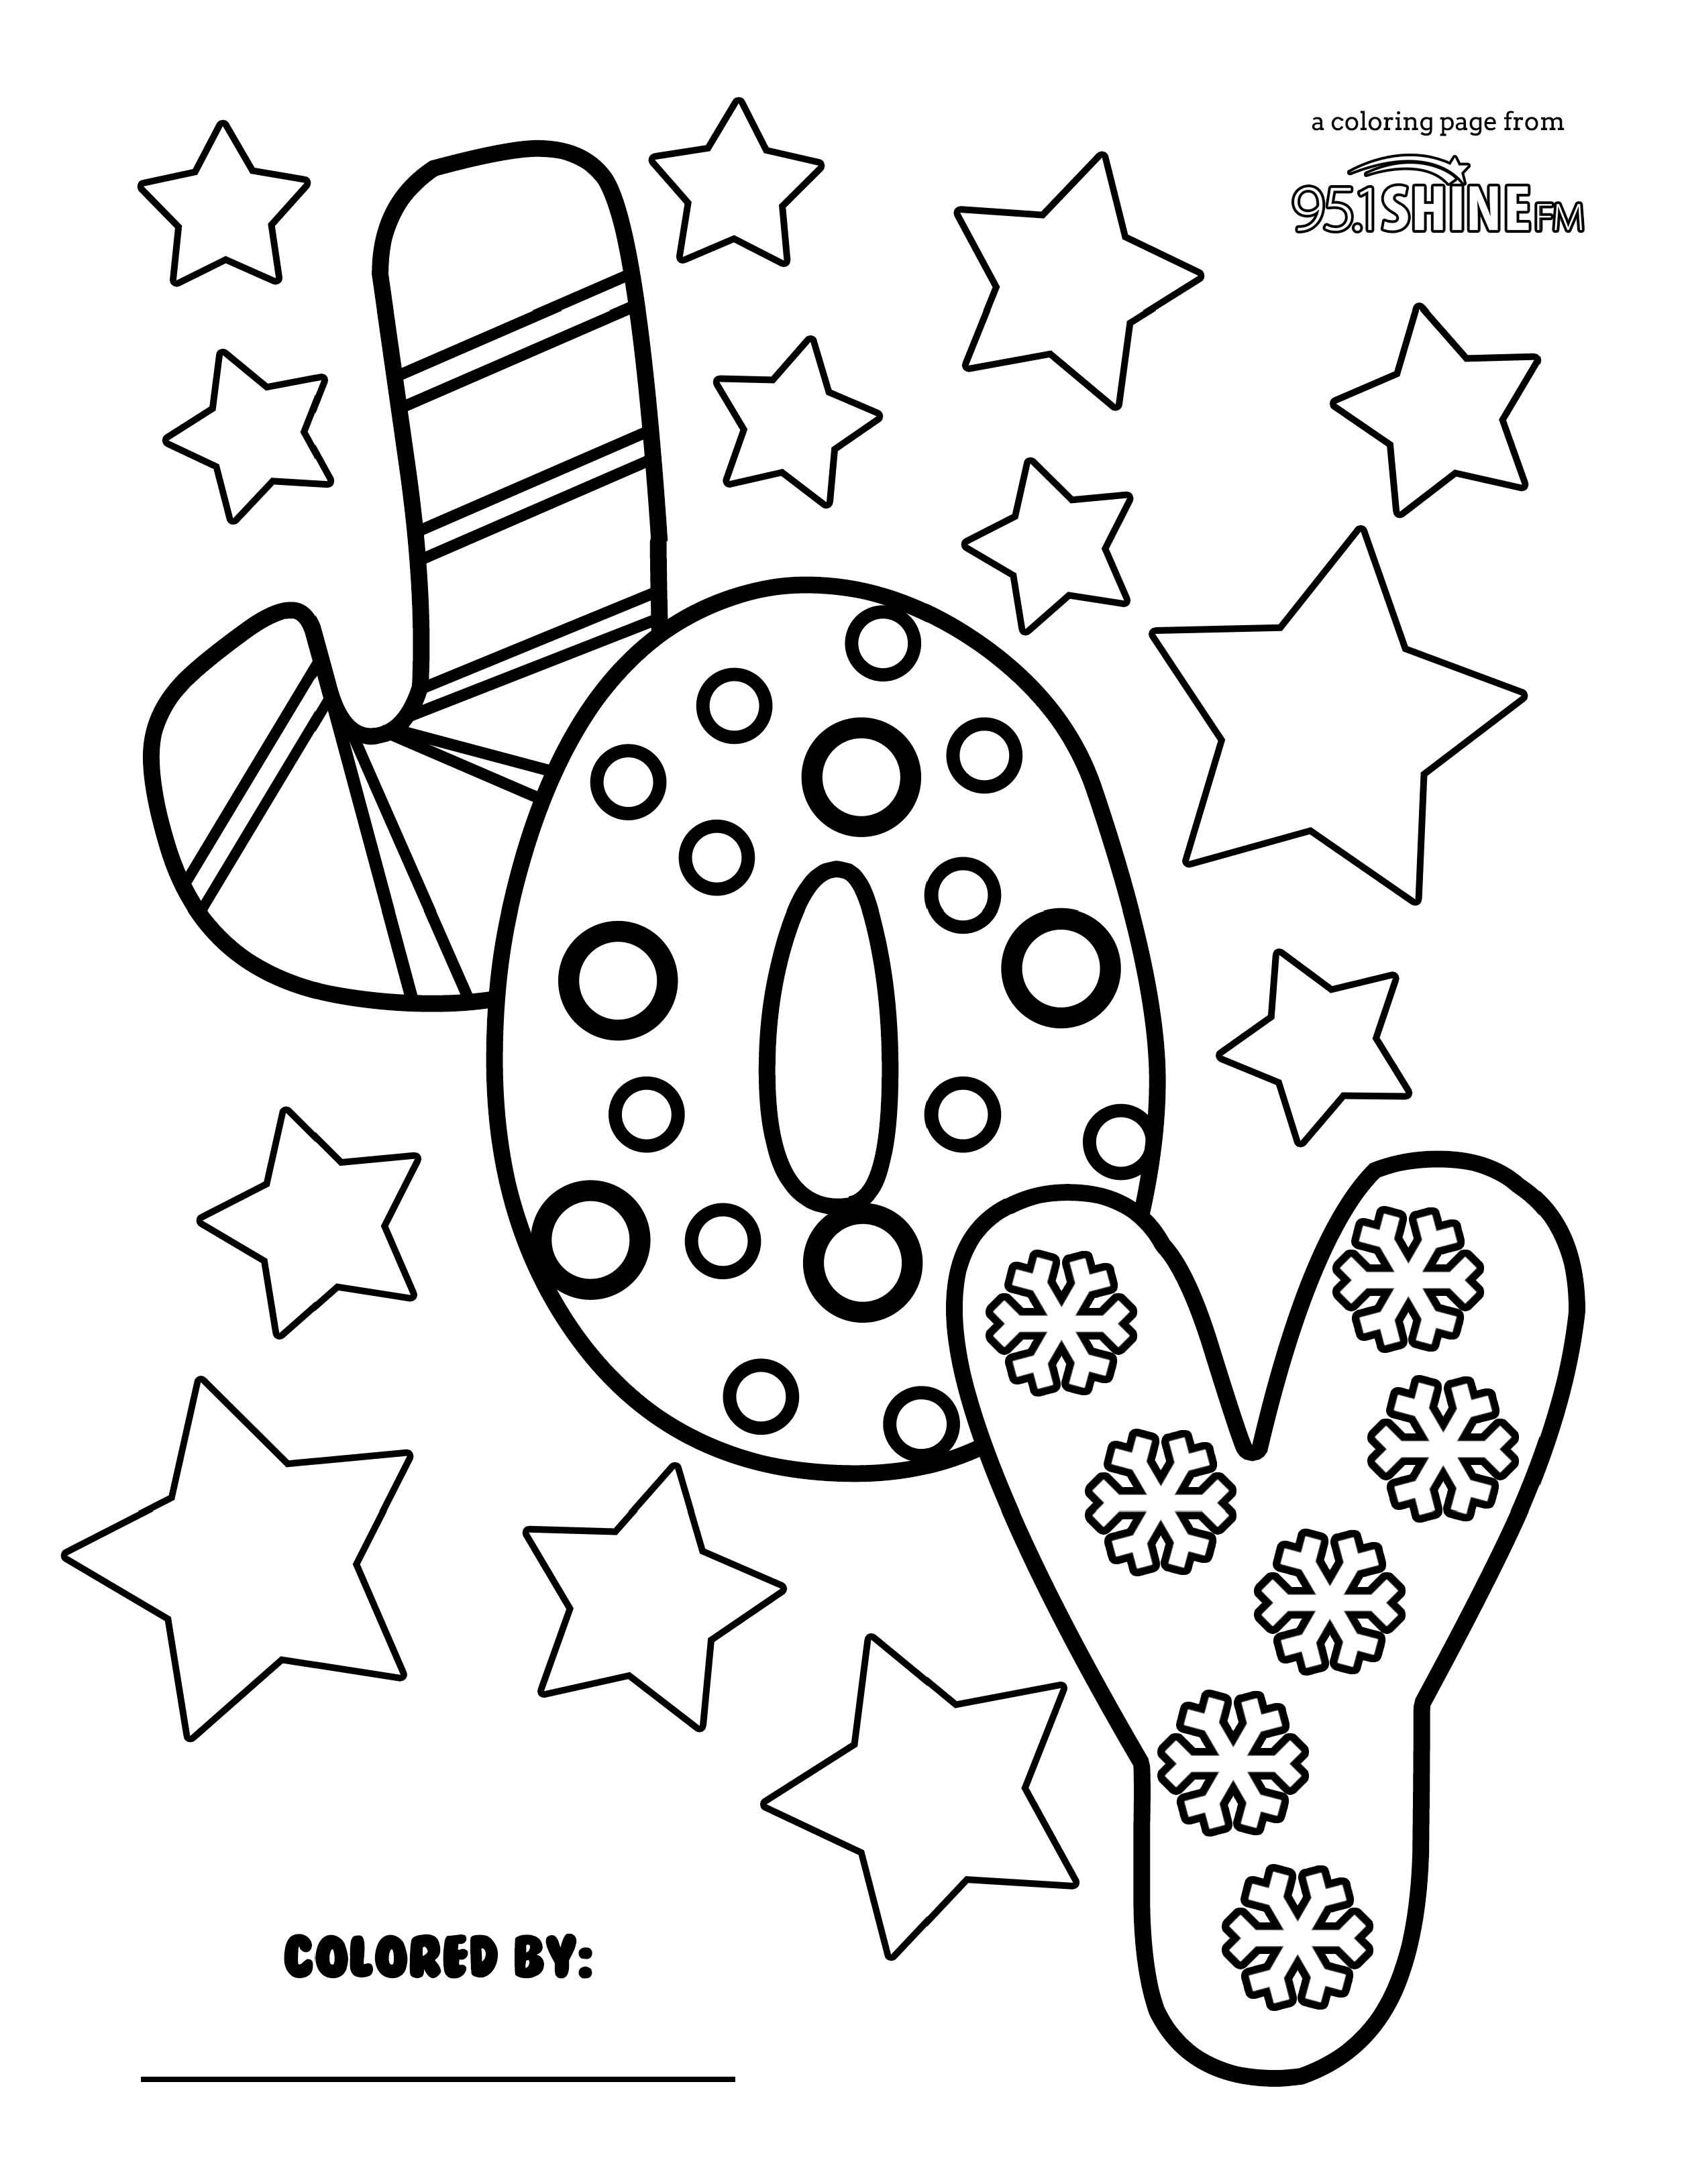 fruit-of-the-spirit-joy-coloring-pages-coloring-pages